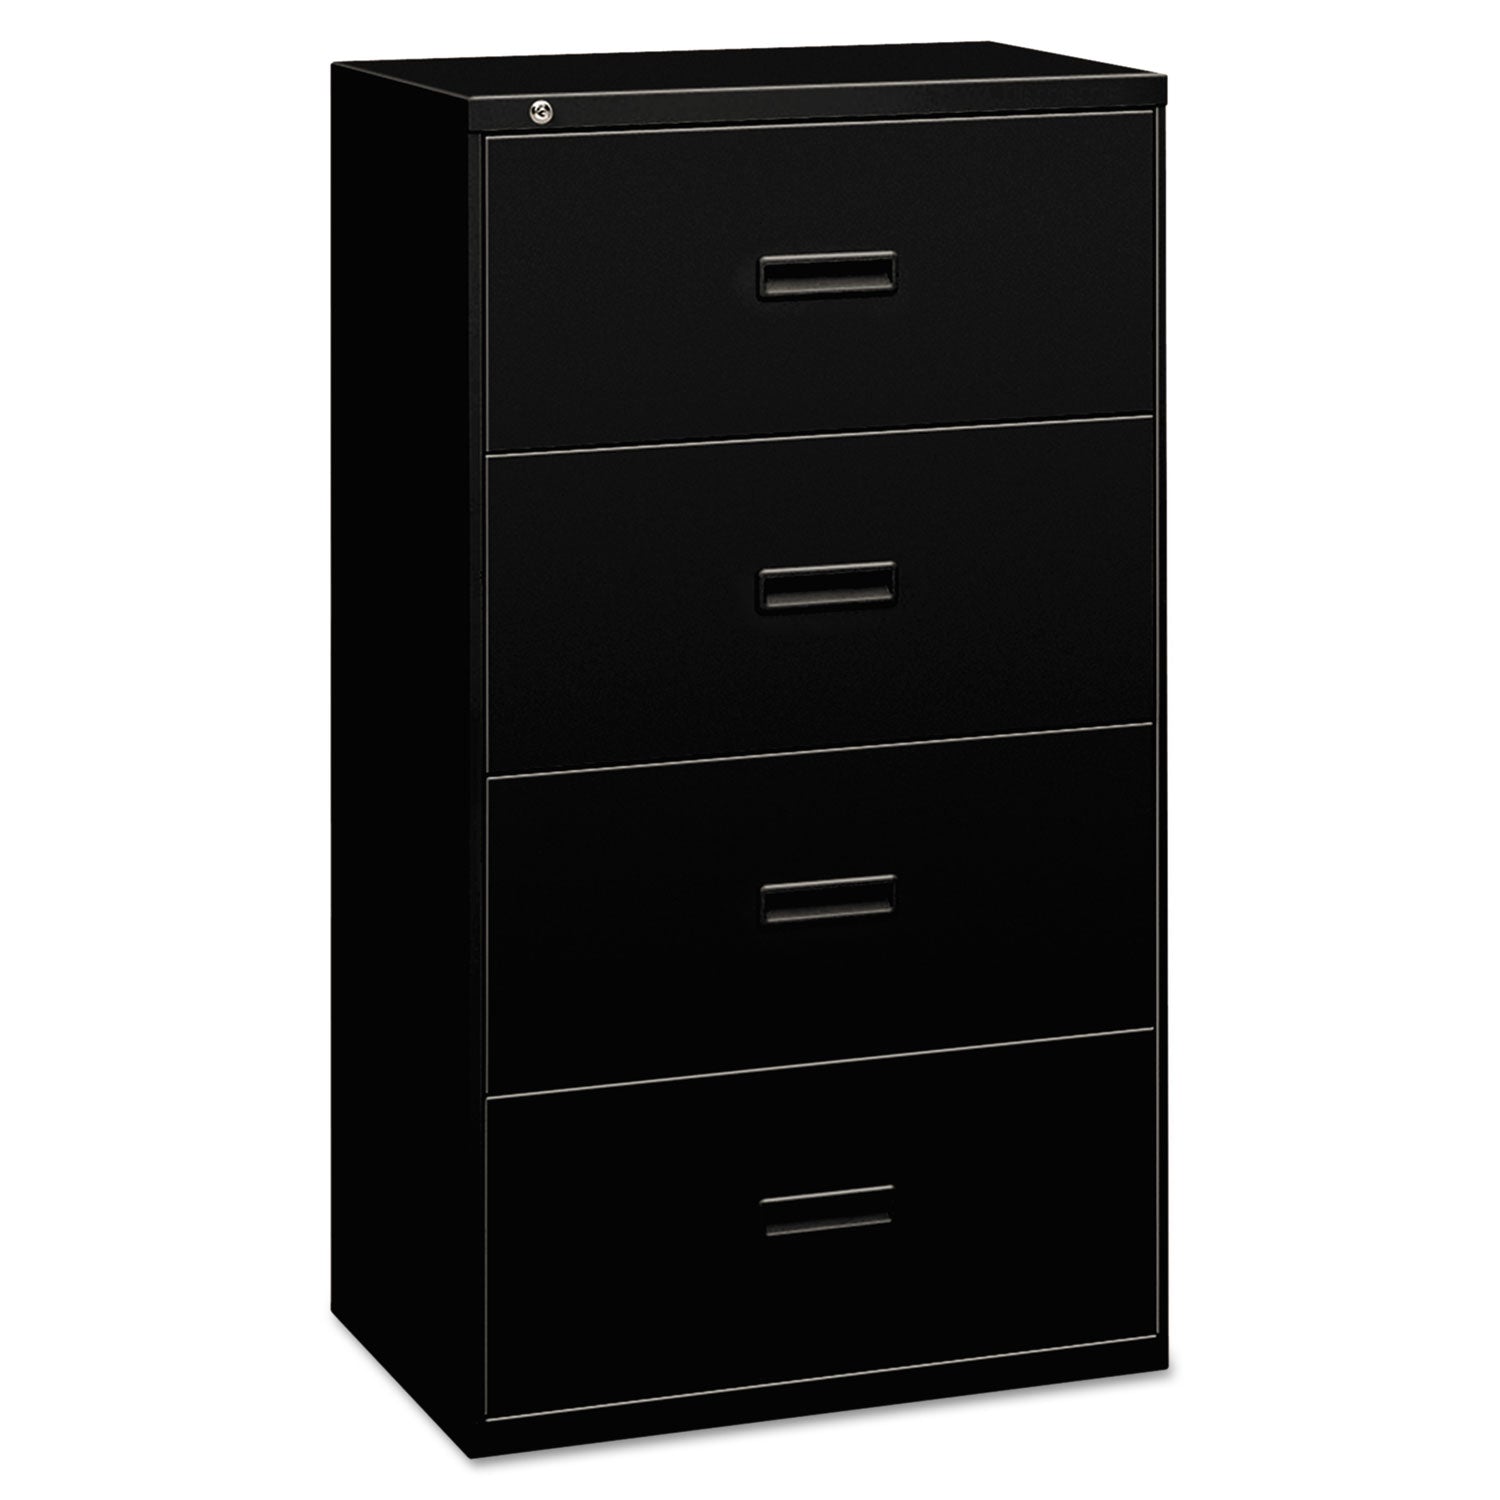 400 Series Lateral File, 4 Legal/Letter-Size File Drawers, Black, 30" x 18" x 52.5 - 